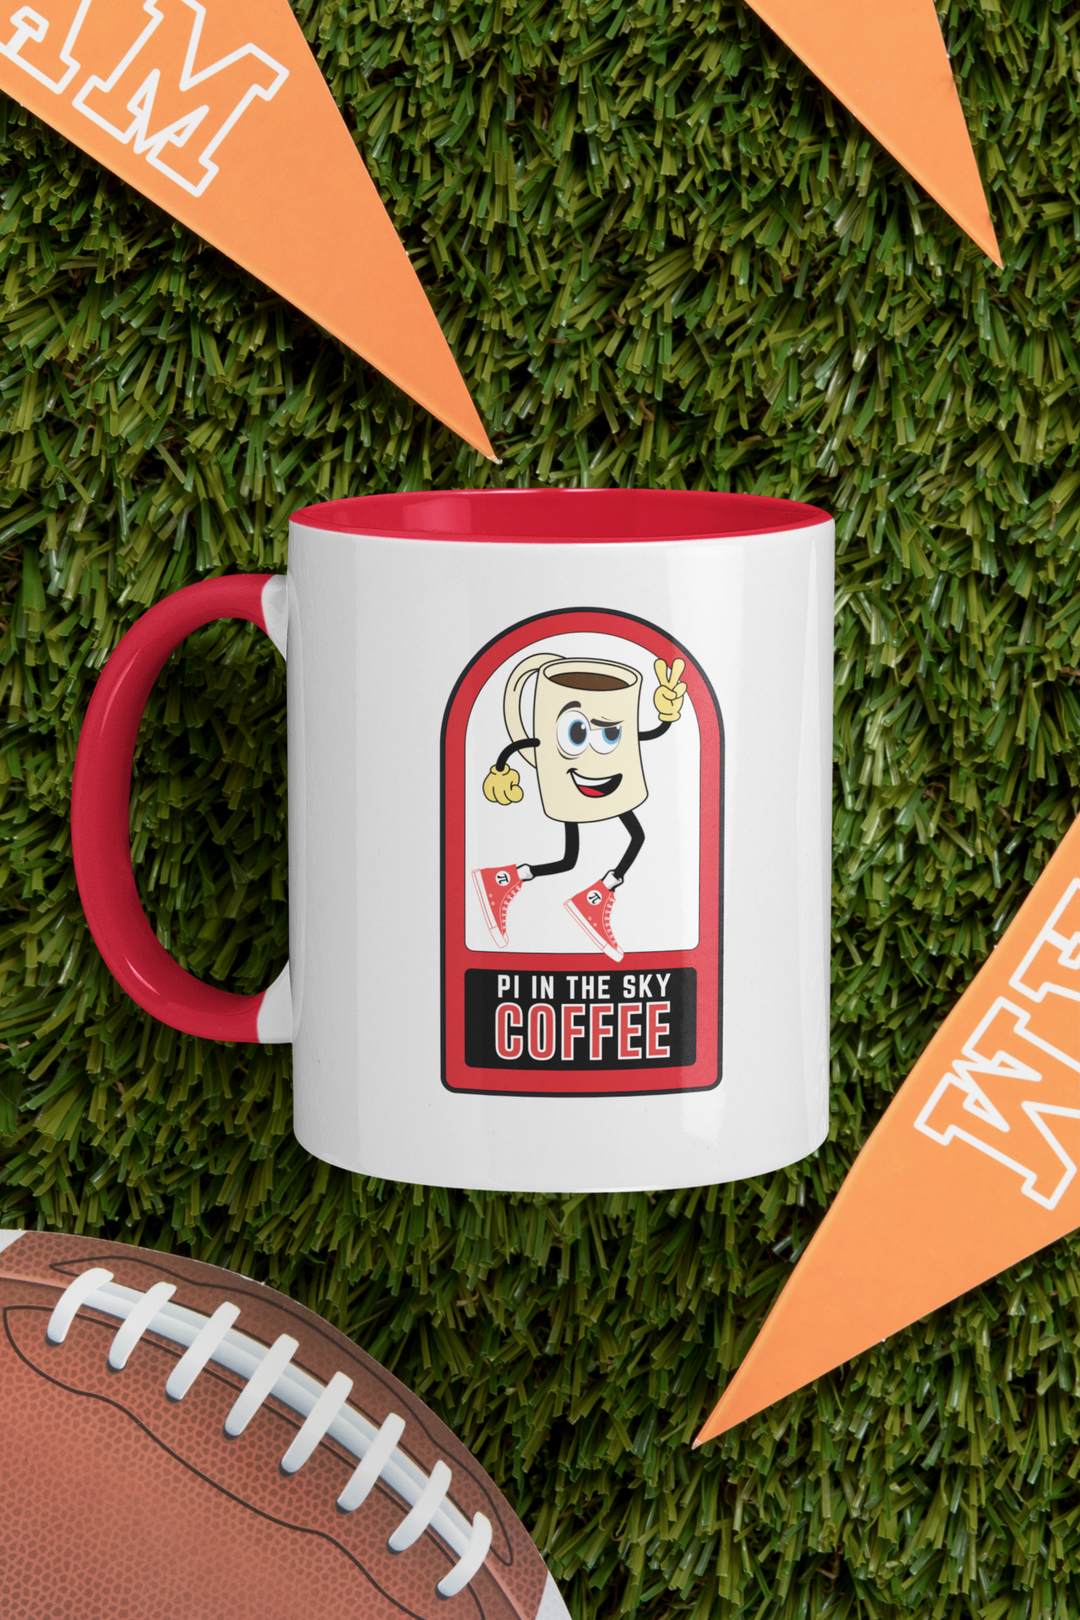 40th Anniversary Special Edition West Division Football Coffee Blend (Dark French Roast)